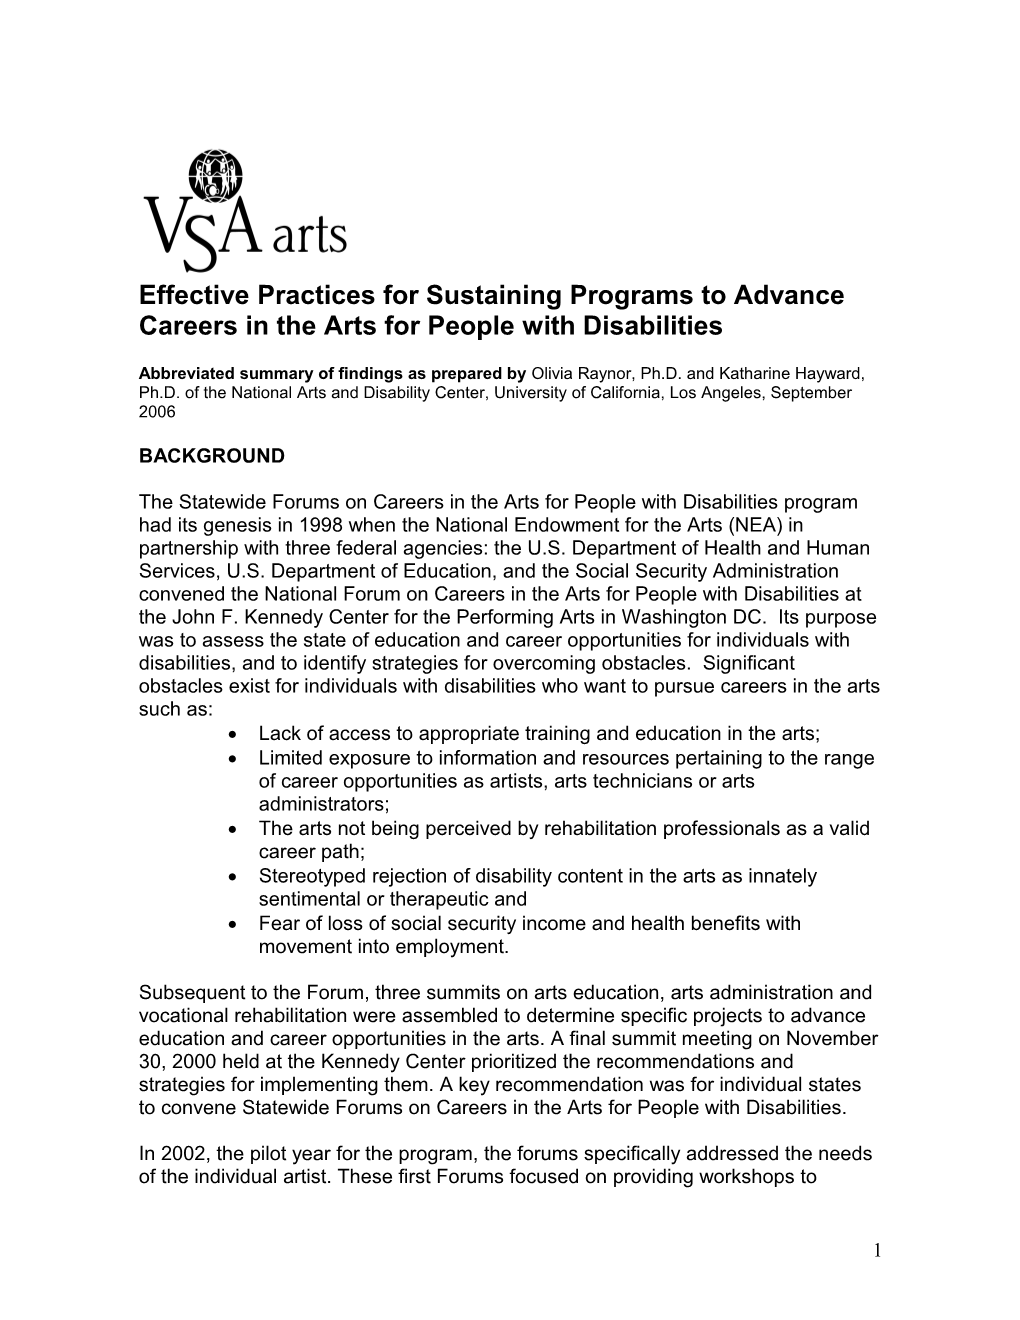 Effective Practices for Sustaining Programs to Advance Careers in the Arts for People With